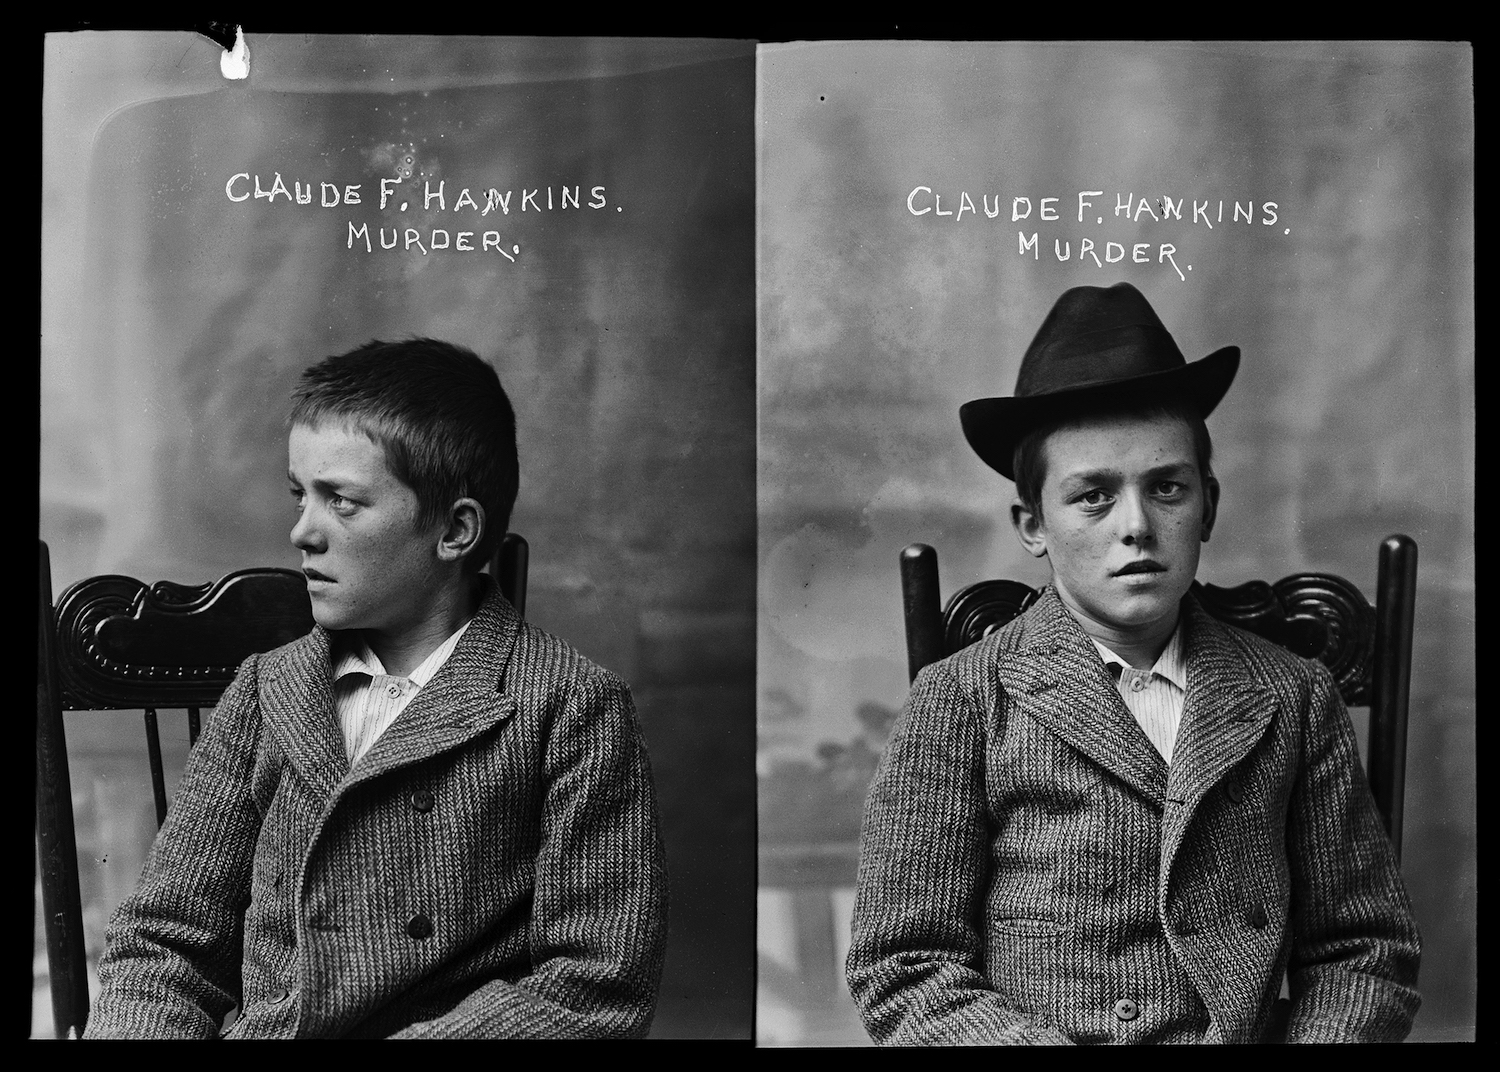 Arne Svenson, Claude F. Hankins from the series Prisoners, 1997/2019, Digital reproduction of glass plate negatives from early 20th c